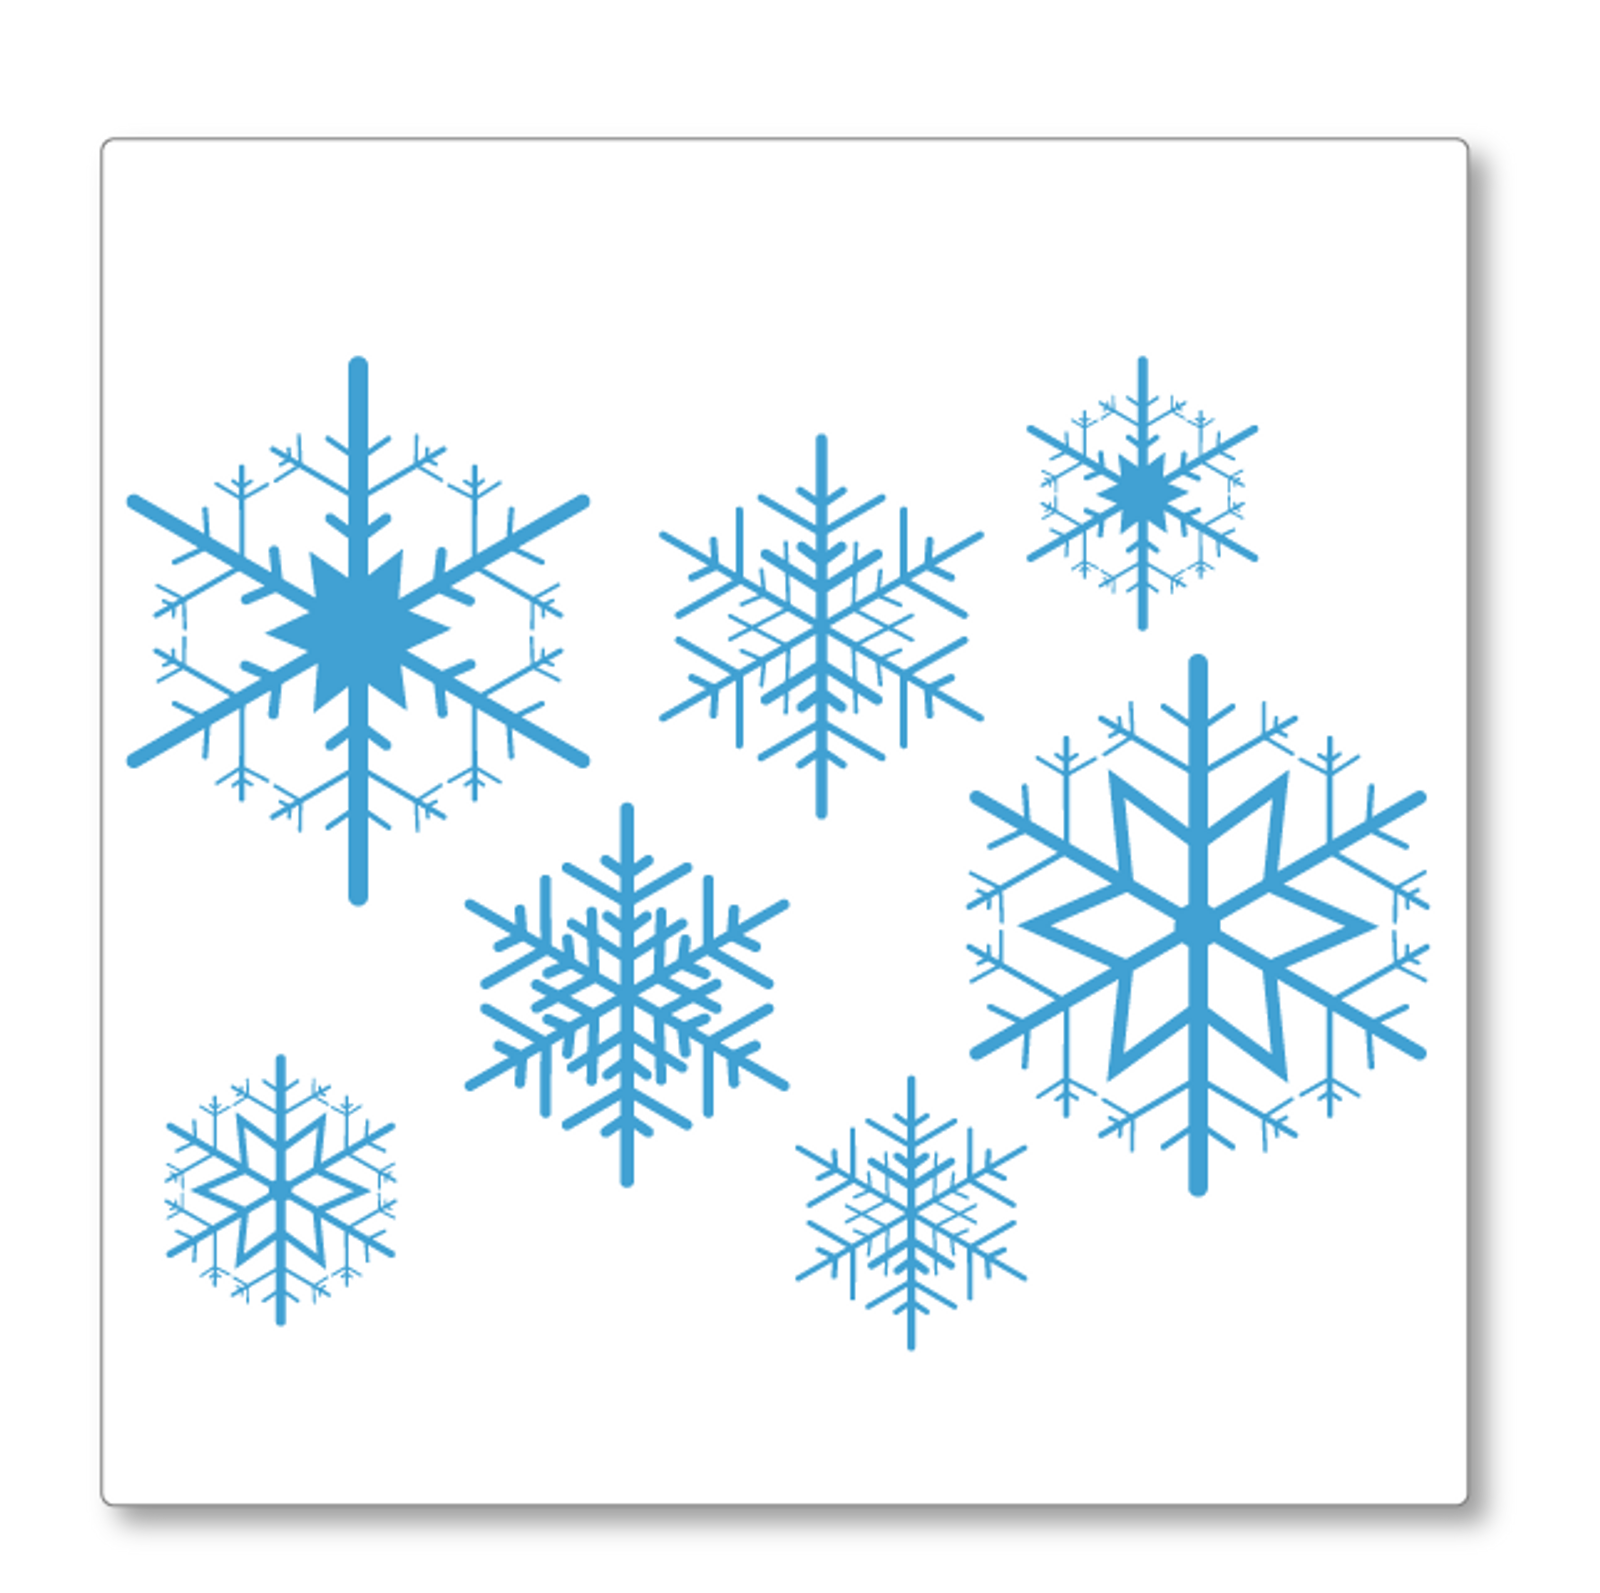 Let it snow! This versatile vinyl snowflakes decal will make any wall or window look great this Christmas. Shown here in blue.